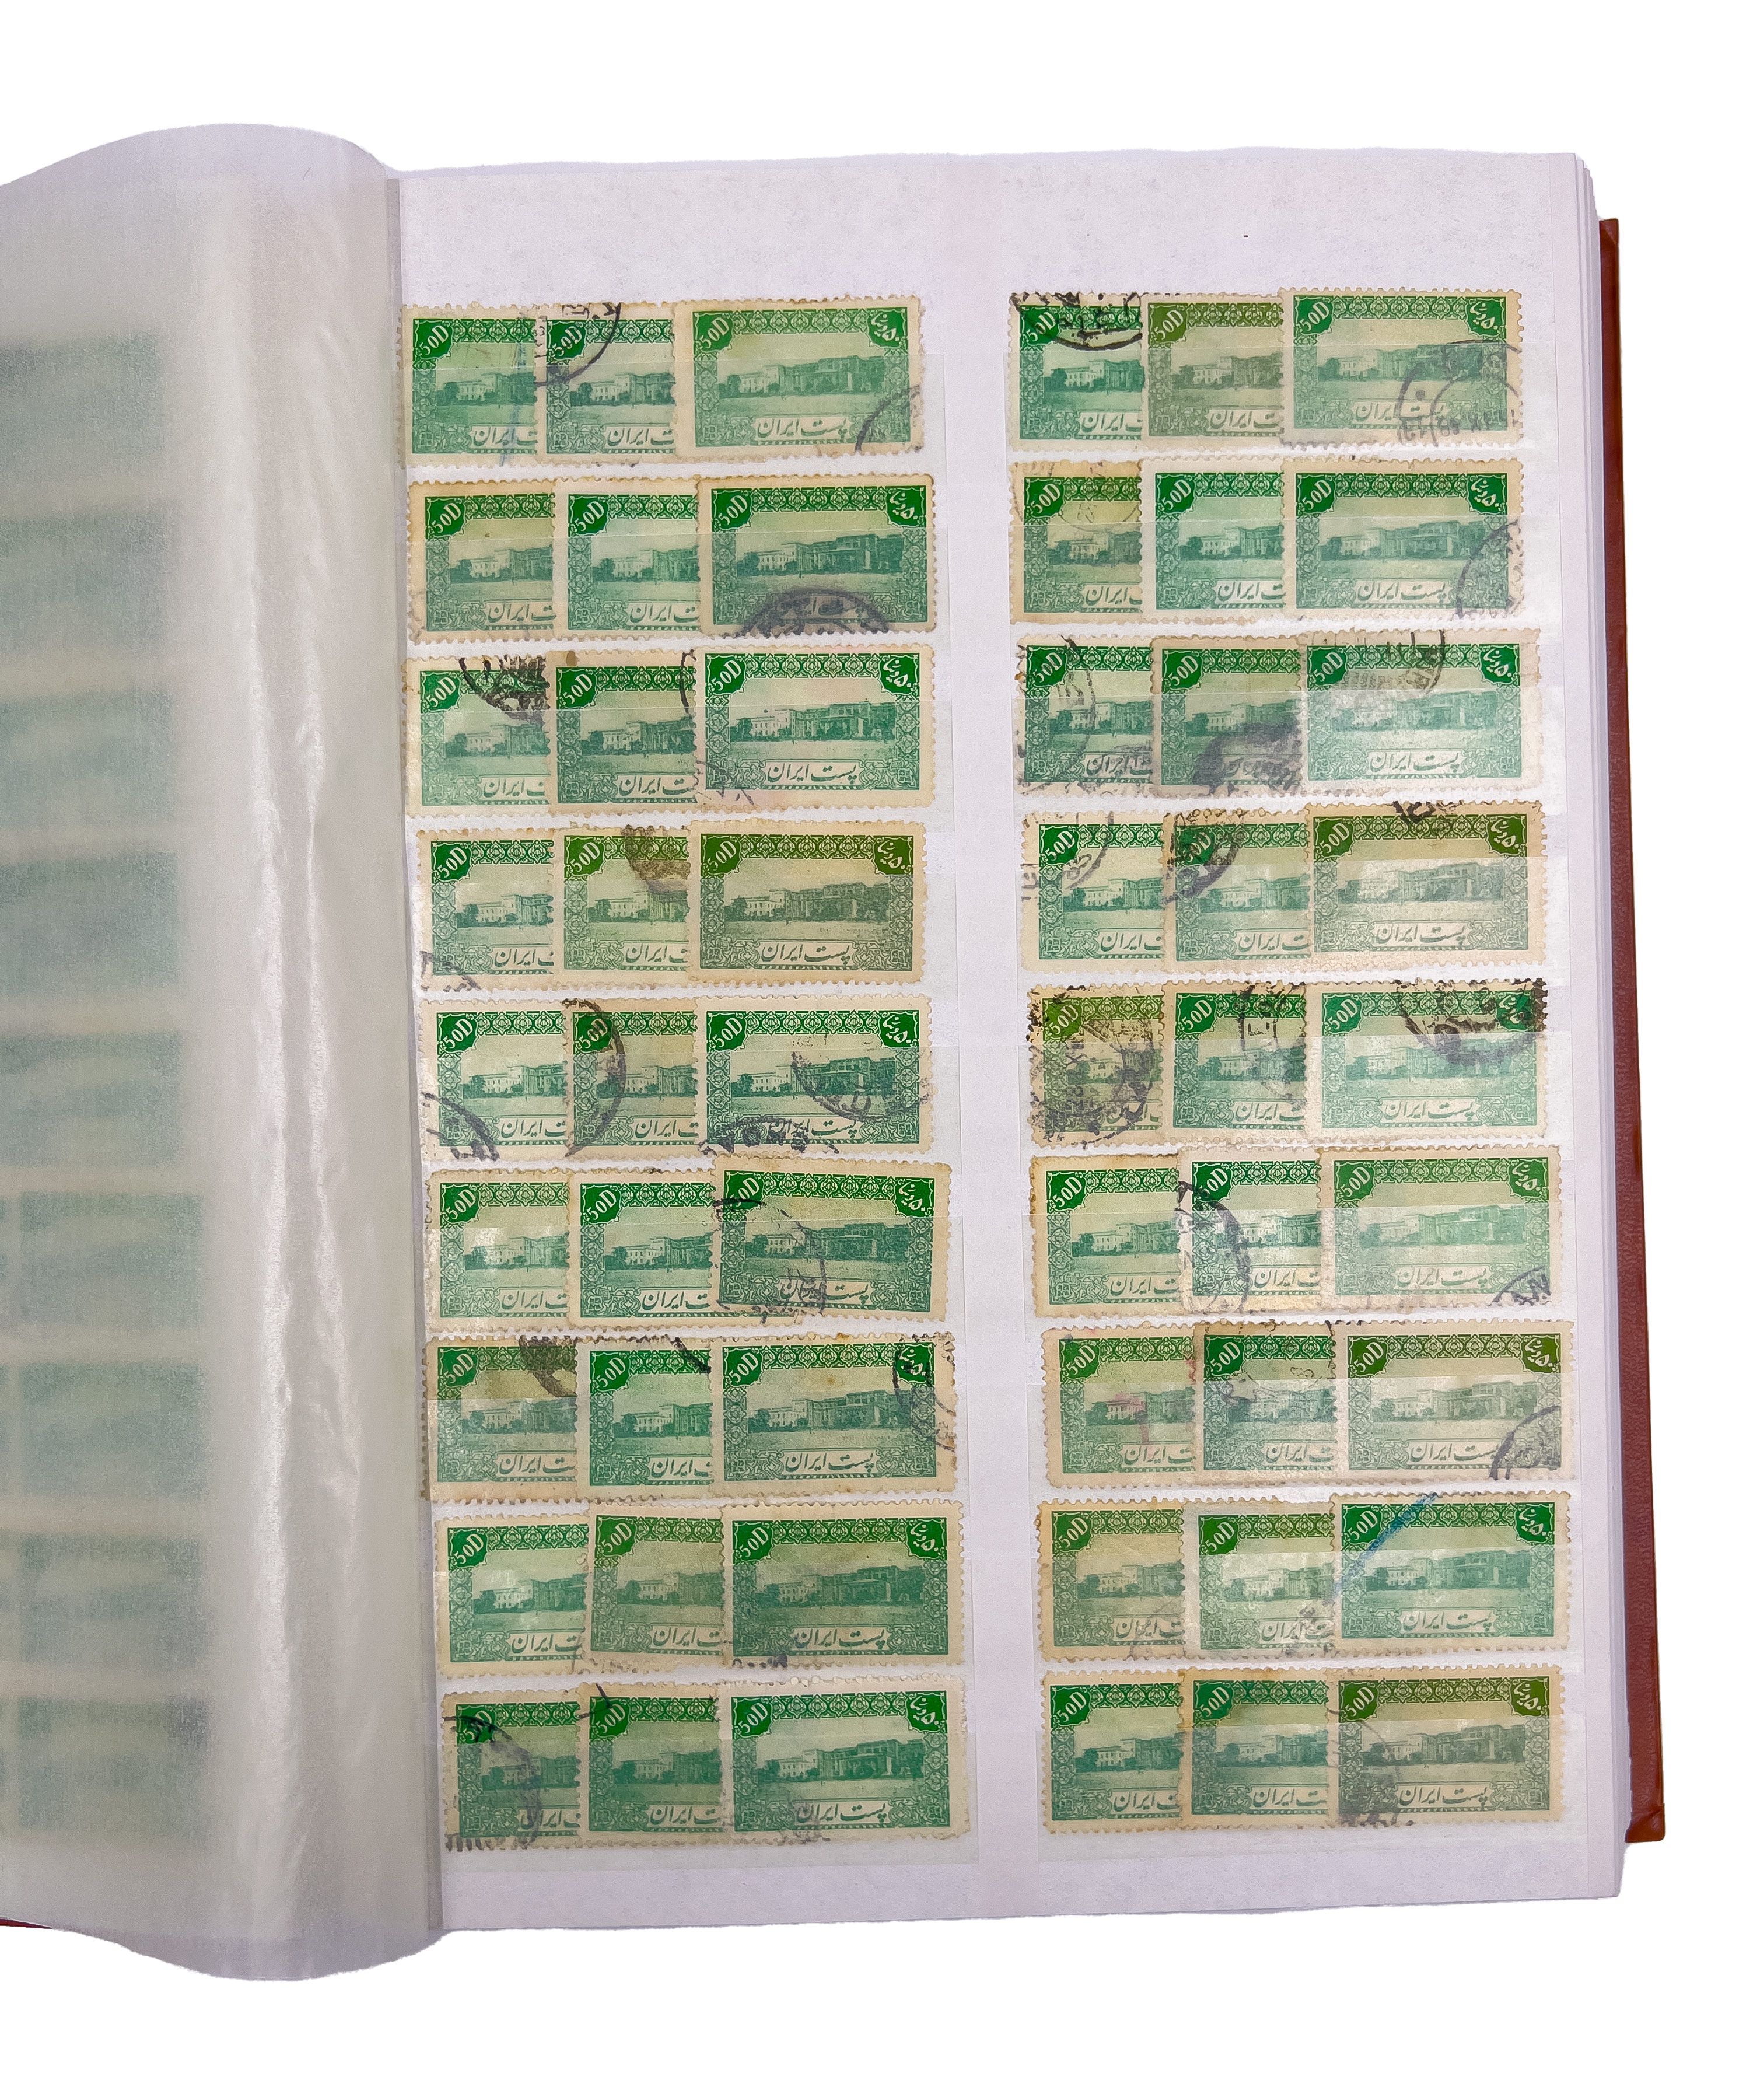 RARE & EXTENSIVE COLLECTION OF PERSIAN PAHLAVI POST STAMPS - Image 61 of 63